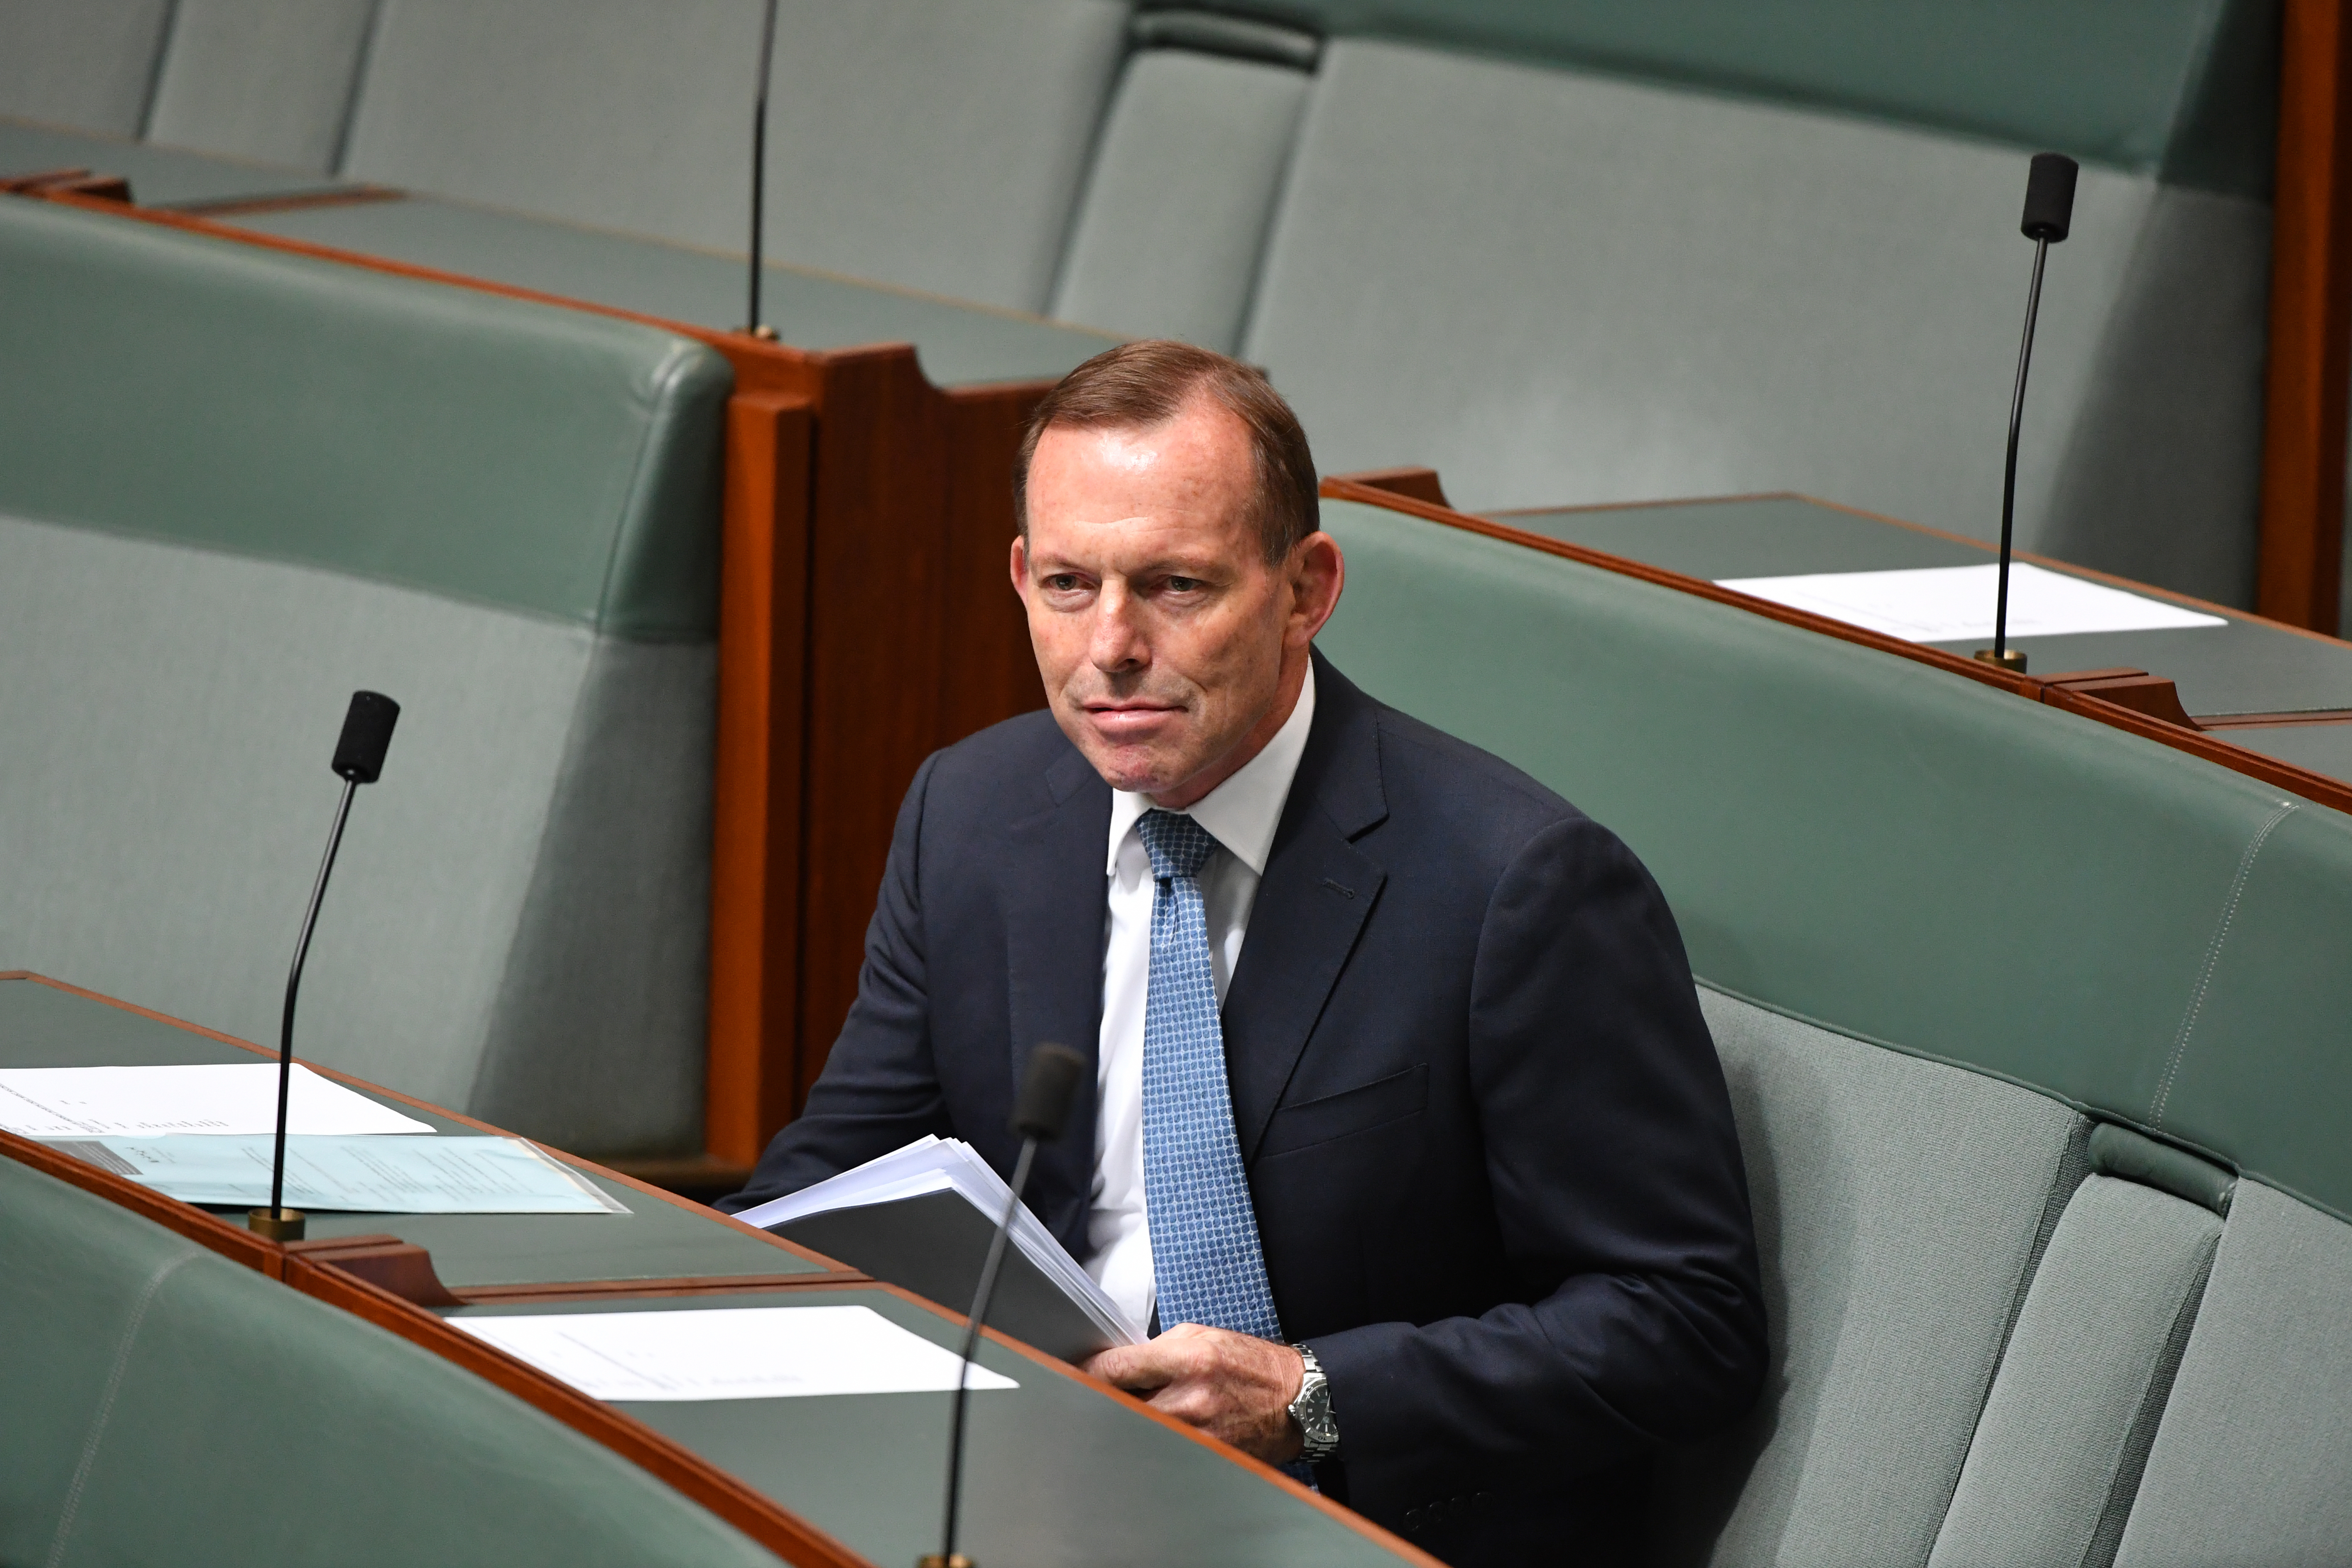 Tony Abbott, Weirdo, Is Leading A Lib Social Media Campaign Purely About Him